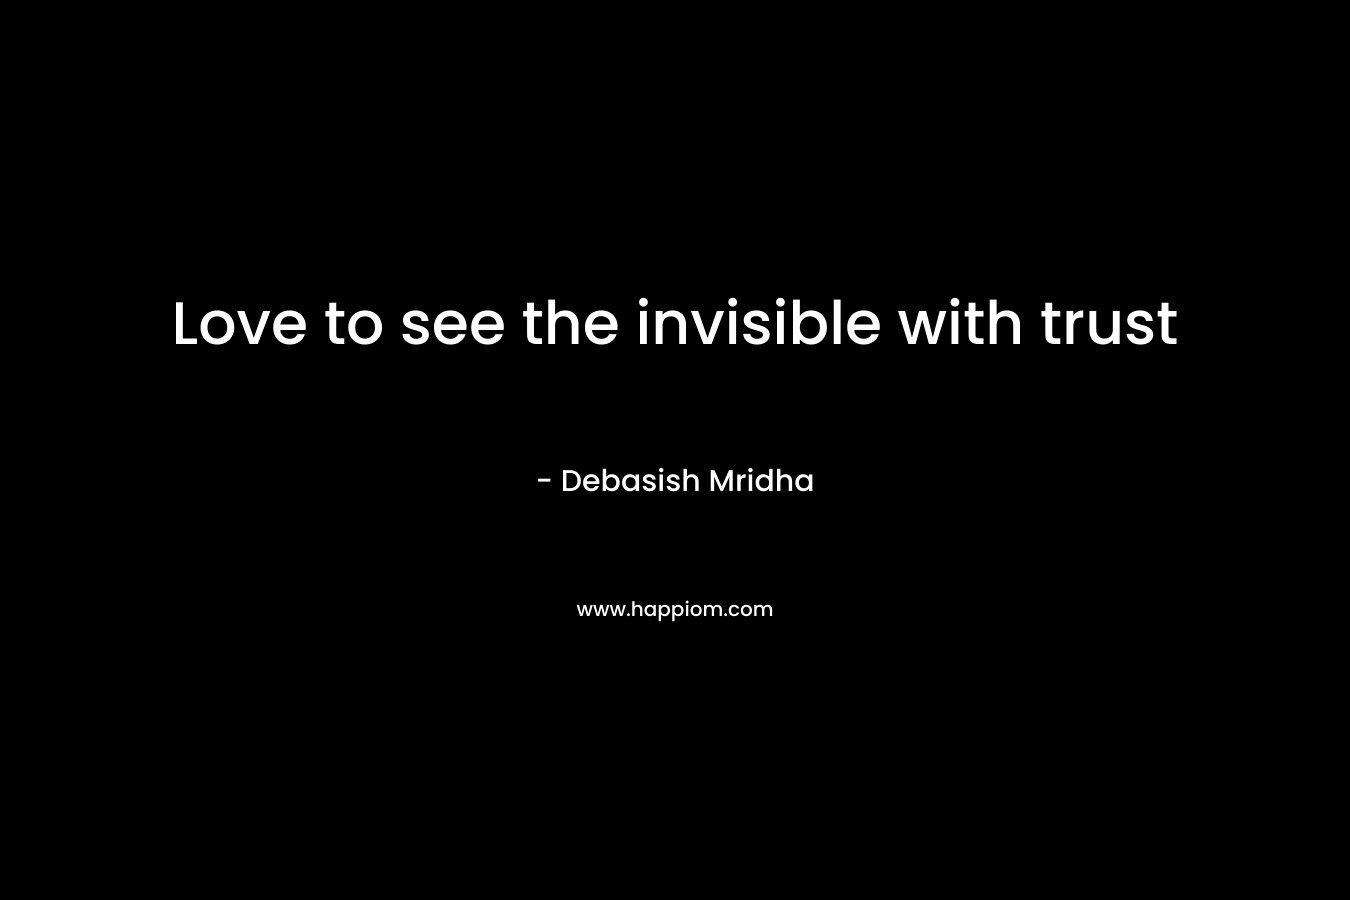 Love to see the invisible with trust